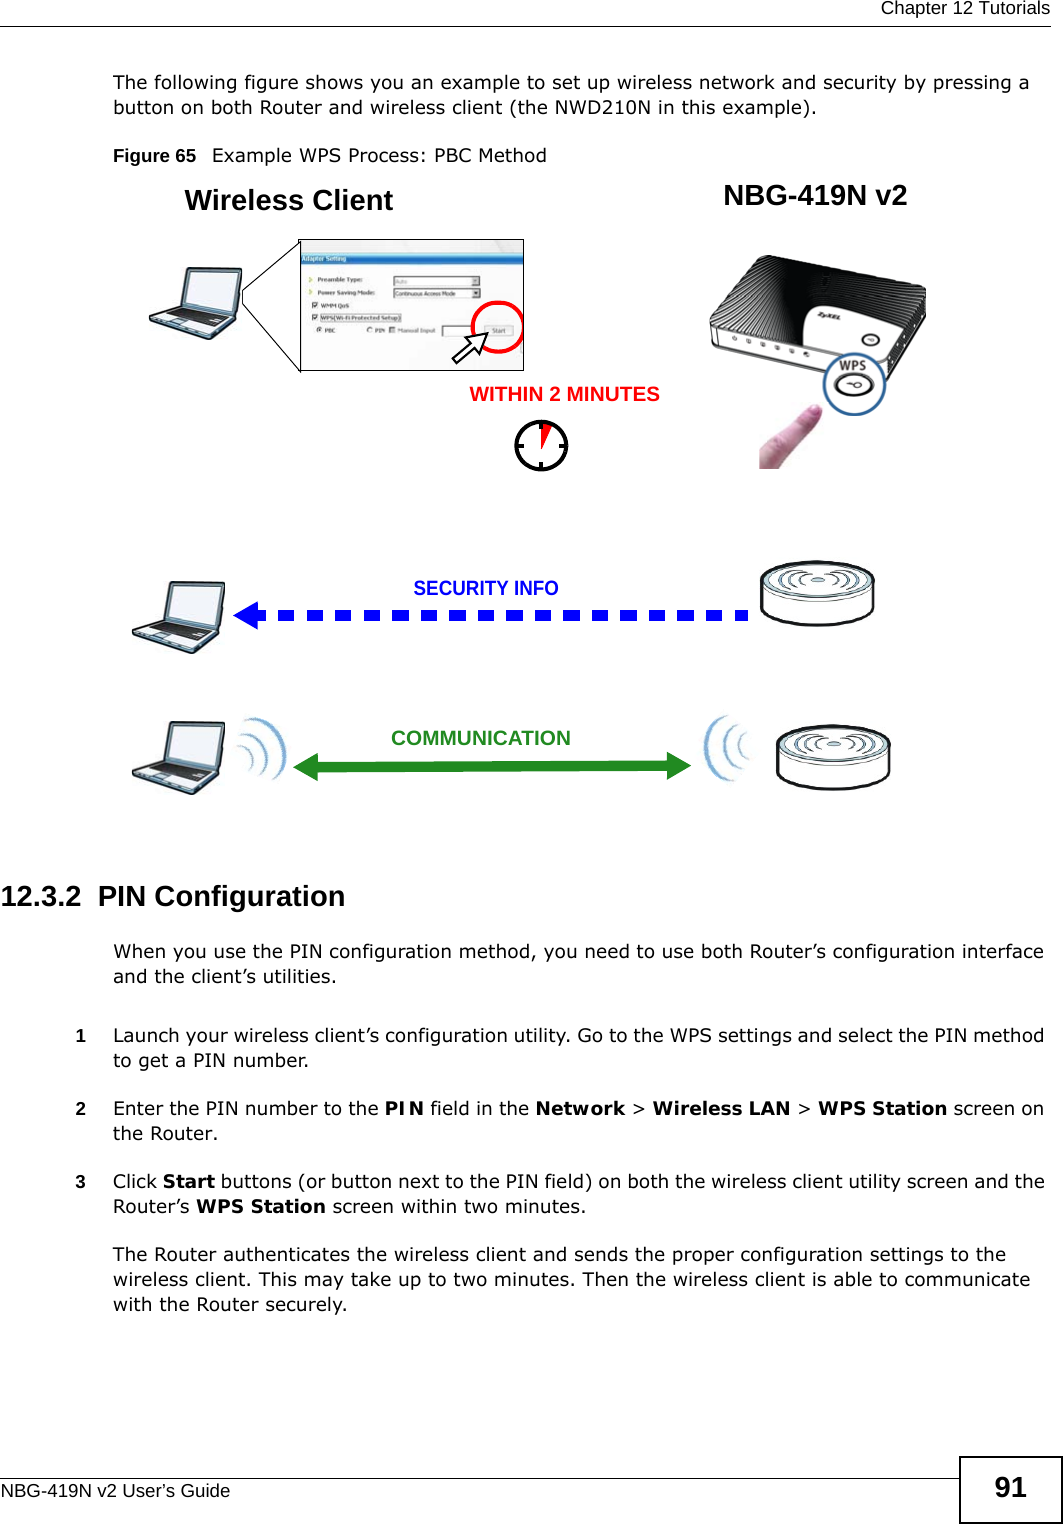  Chapter 12 TutorialsNBG-419N v2 User’s Guide 91The following figure shows you an example to set up wireless network and security by pressing a button on both Router and wireless client (the NWD210N in this example).Figure 65   Example WPS Process: PBC Method12.3.2  PIN ConfigurationWhen you use the PIN configuration method, you need to use both Router’s configuration interface and the client’s utilities.1Launch your wireless client’s configuration utility. Go to the WPS settings and select the PIN method to get a PIN number.2Enter the PIN number to the PIN field in the Network &gt; Wireless LAN &gt; WPS Station screen on the Router.3Click Start buttons (or button next to the PIN field) on both the wireless client utility screen and the Router’s WPS Station screen within two minutes.The Router authenticates the wireless client and sends the proper configuration settings to the wireless client. This may take up to two minutes. Then the wireless client is able to communicate with the Router securely. Wireless Client    NBG-419N v2SECURITY INFOCOMMUNICATIONWITHIN 2 MINUTES